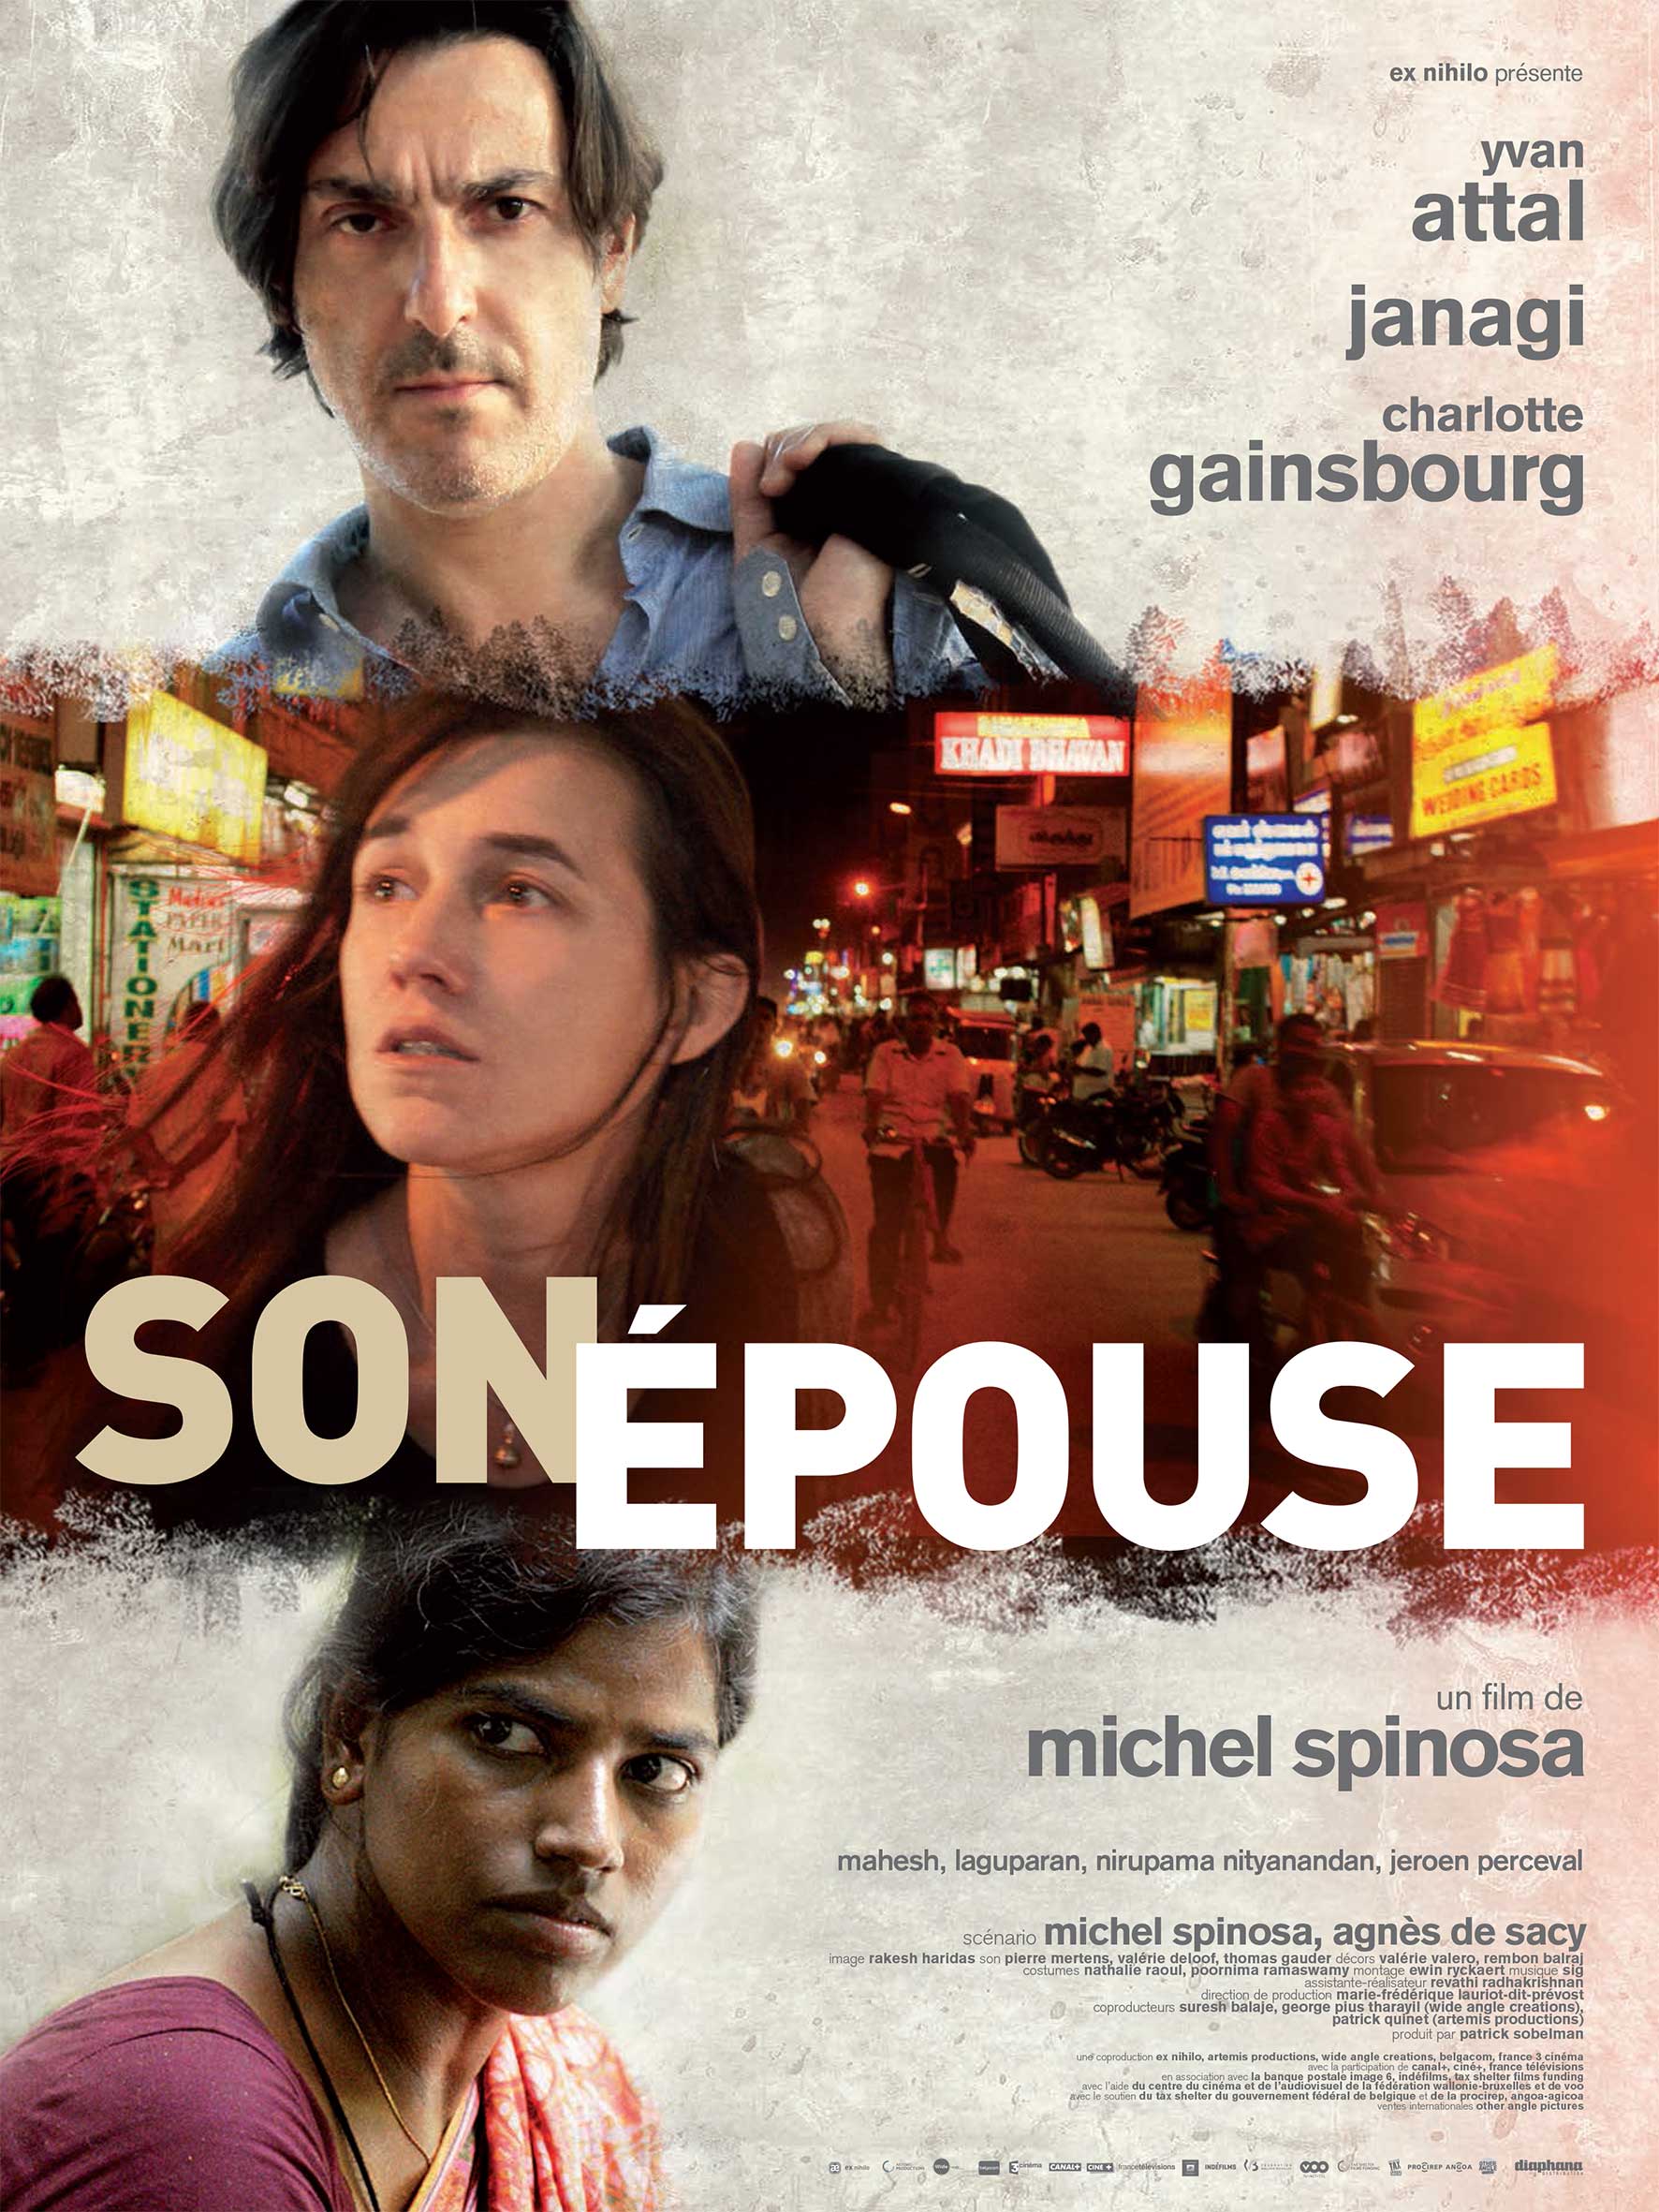 Charlotte Gainsbourg, Yvan Attal and Janagi in Son épouse (2014)